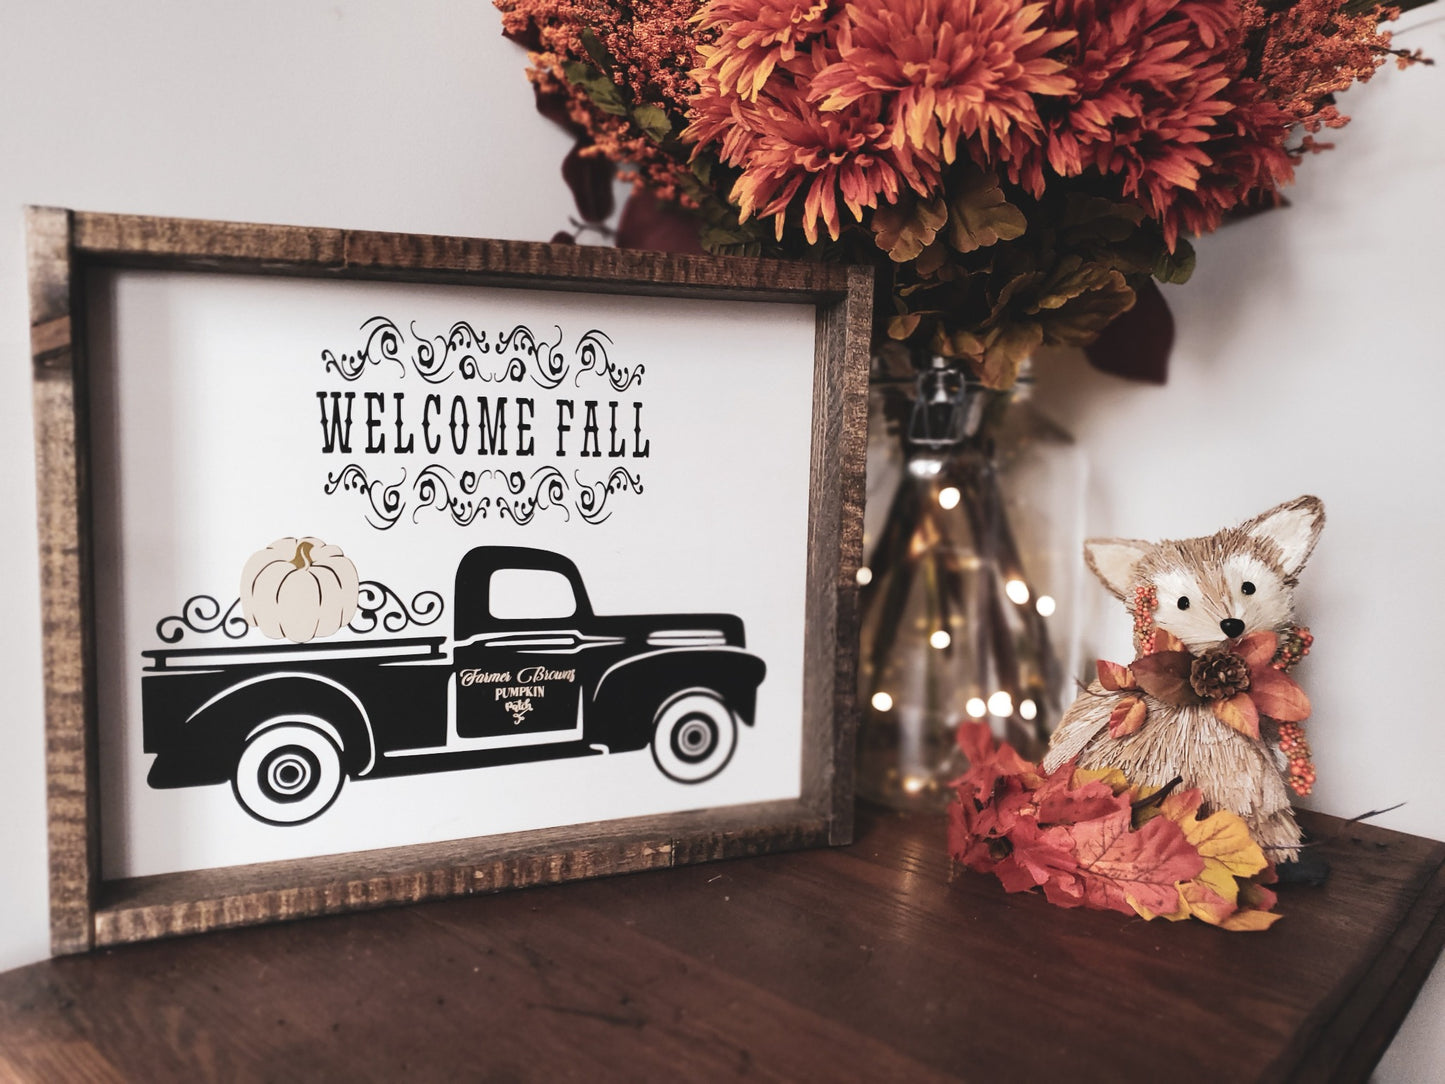 Welcome Fall, Autumn Decor Sign.